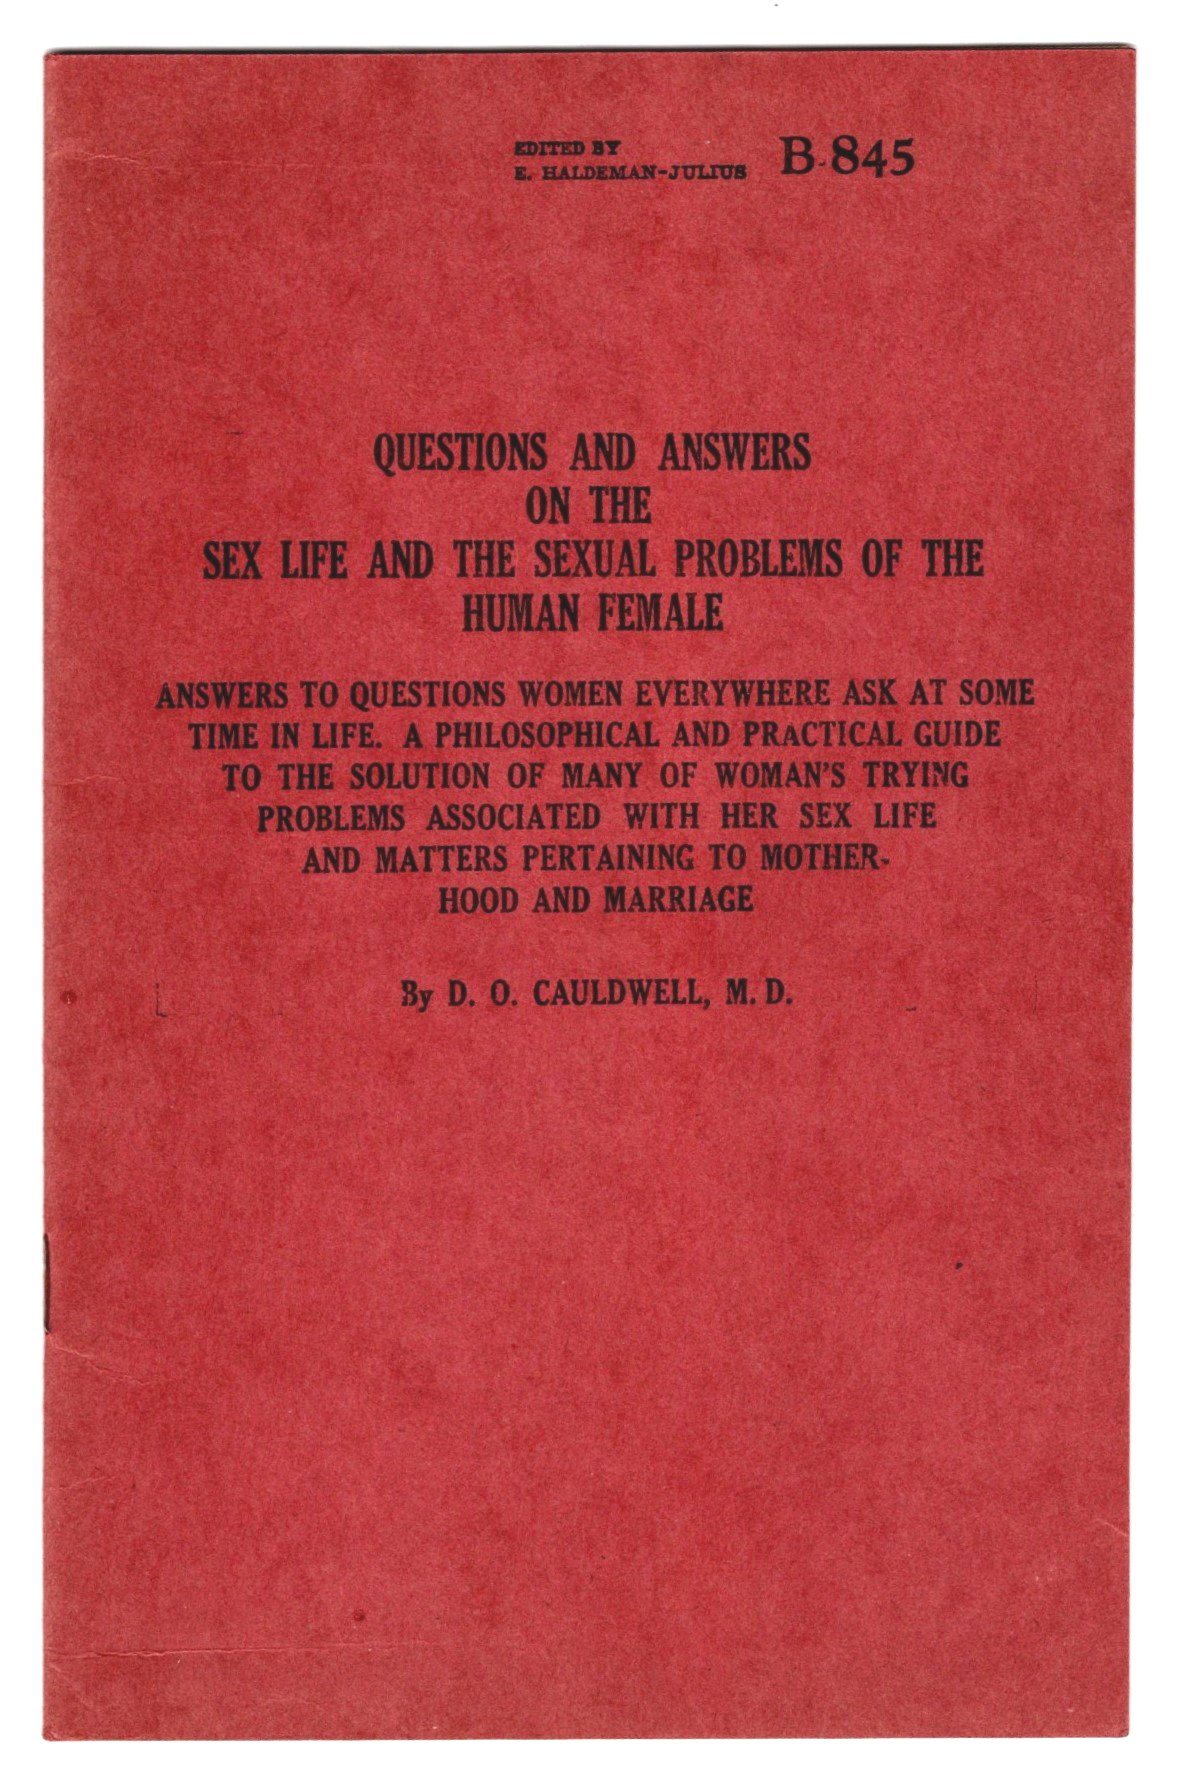 Image for Questions and Answers on the Sex Life and Sexual Problems of the Human Female :  Answers to Questions Women Everywhere Ask at Some Time in Life, a Philosophical and Practical Guide to the Solution of Many of Woman's Trying Problems Associated with Her Sex Life and Matters Pertaining to Motherhood and Marriage